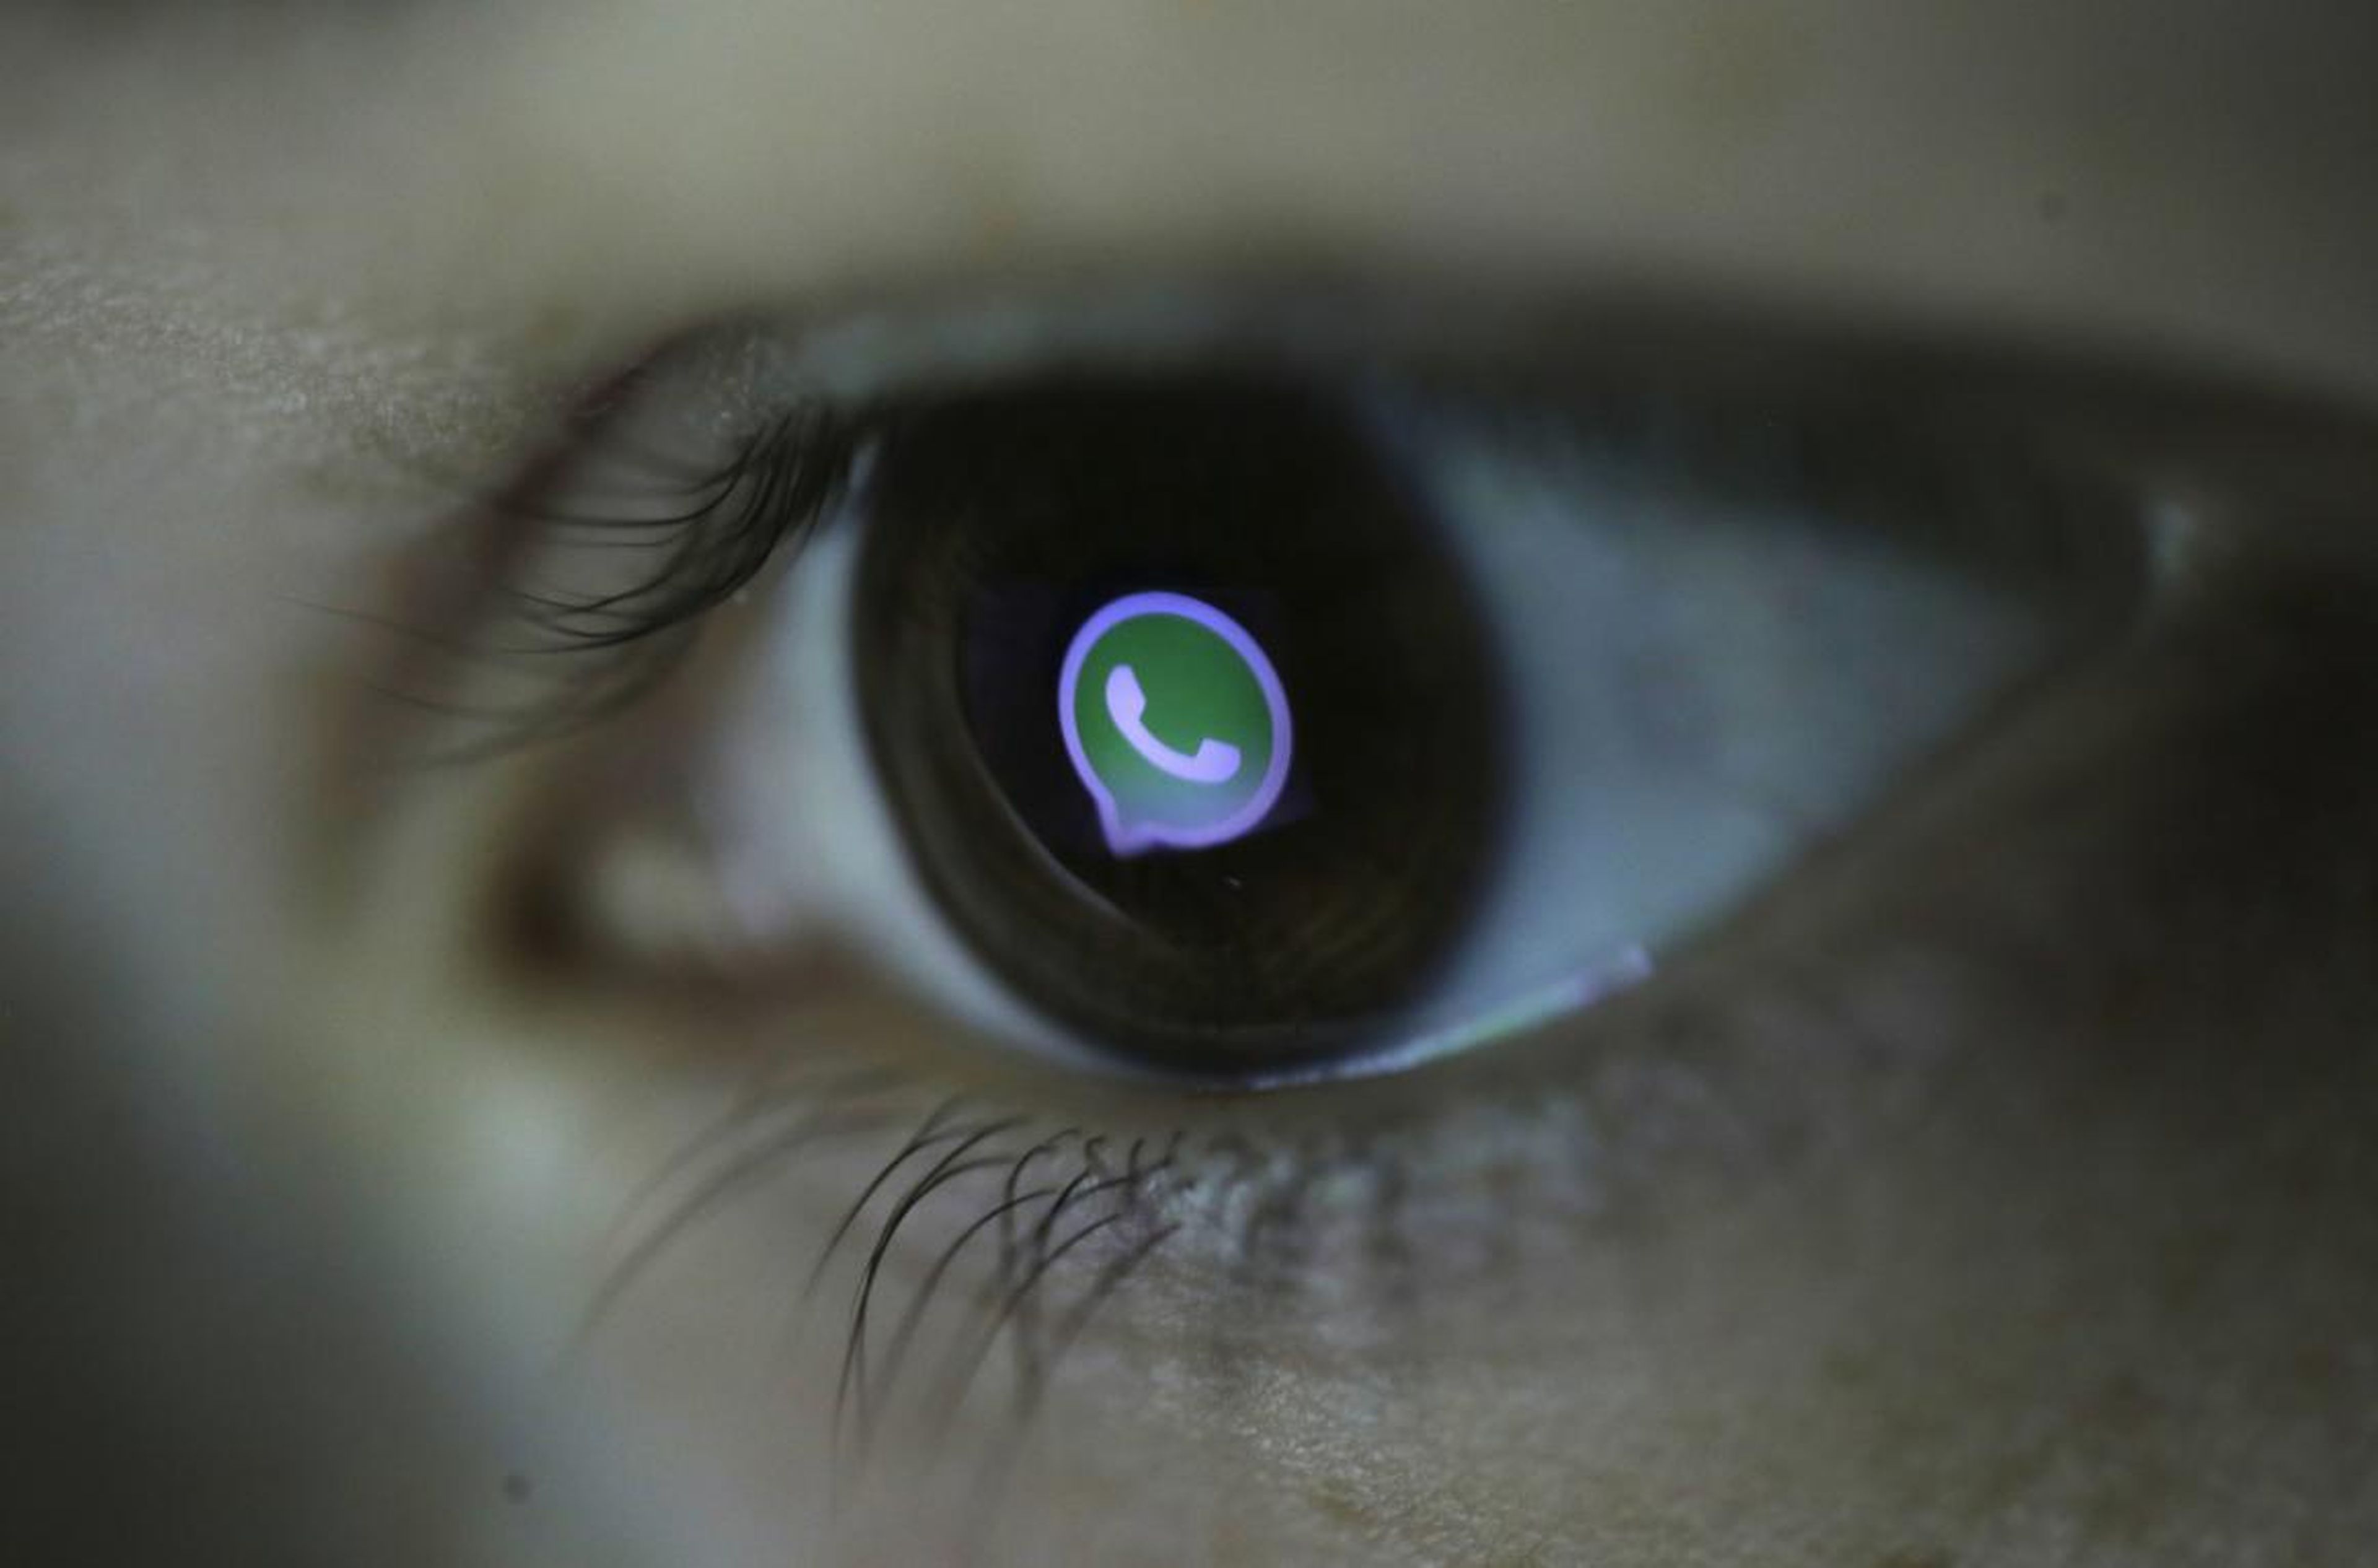 October: WhatsApp's popularity in Brazil is used for widespread sharing of false propaganda, spam messages, and hoaxes ahead of the country's contentious presidential election.